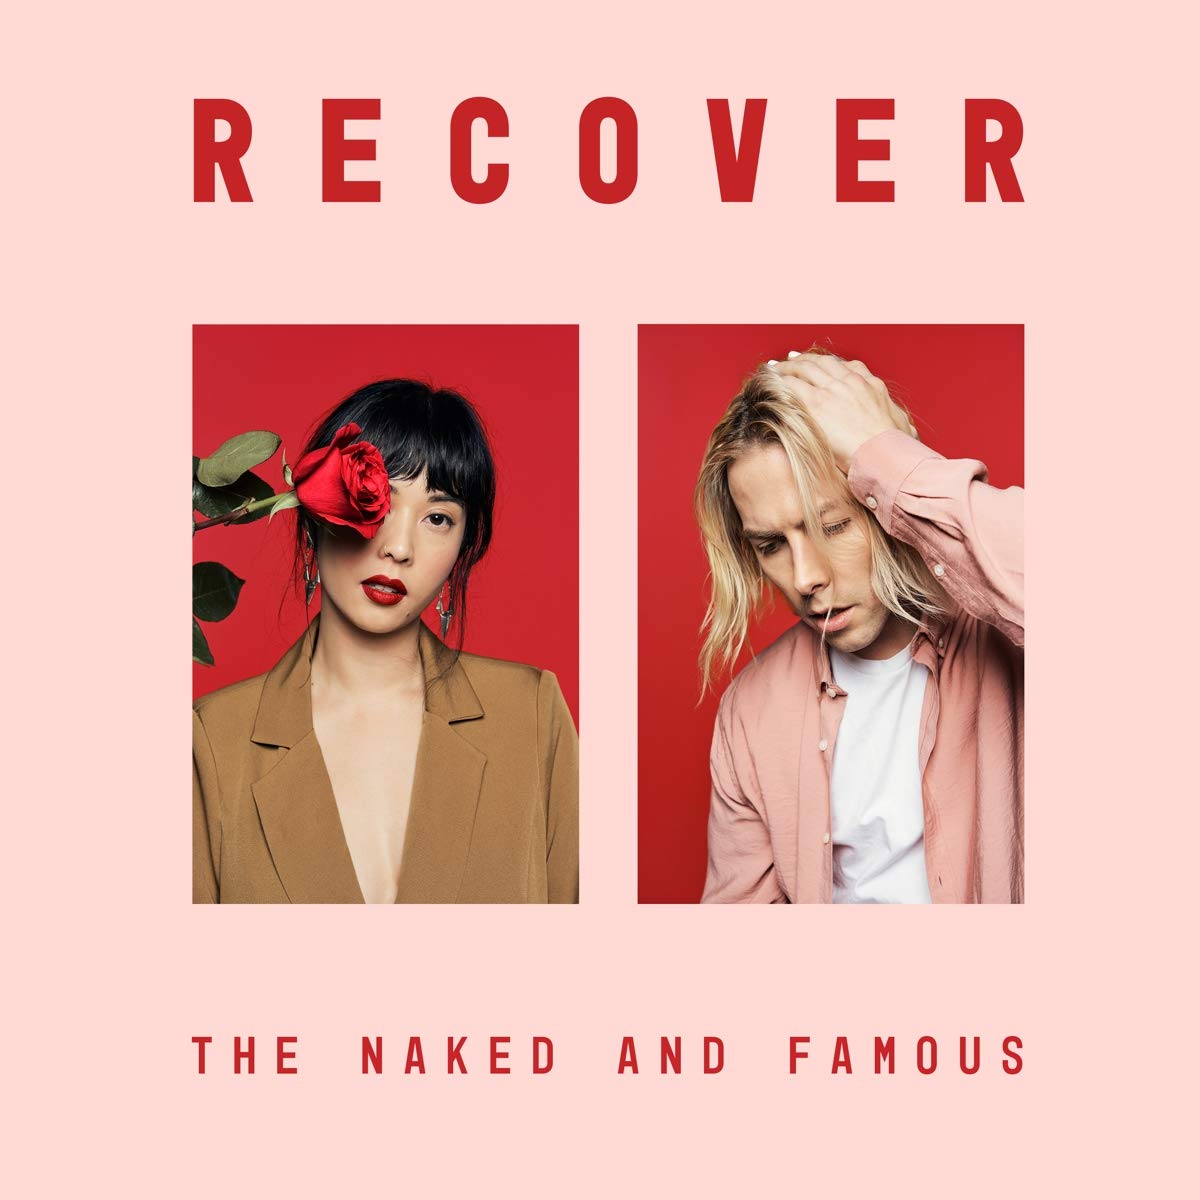 The Naked and famous "Recover" LP